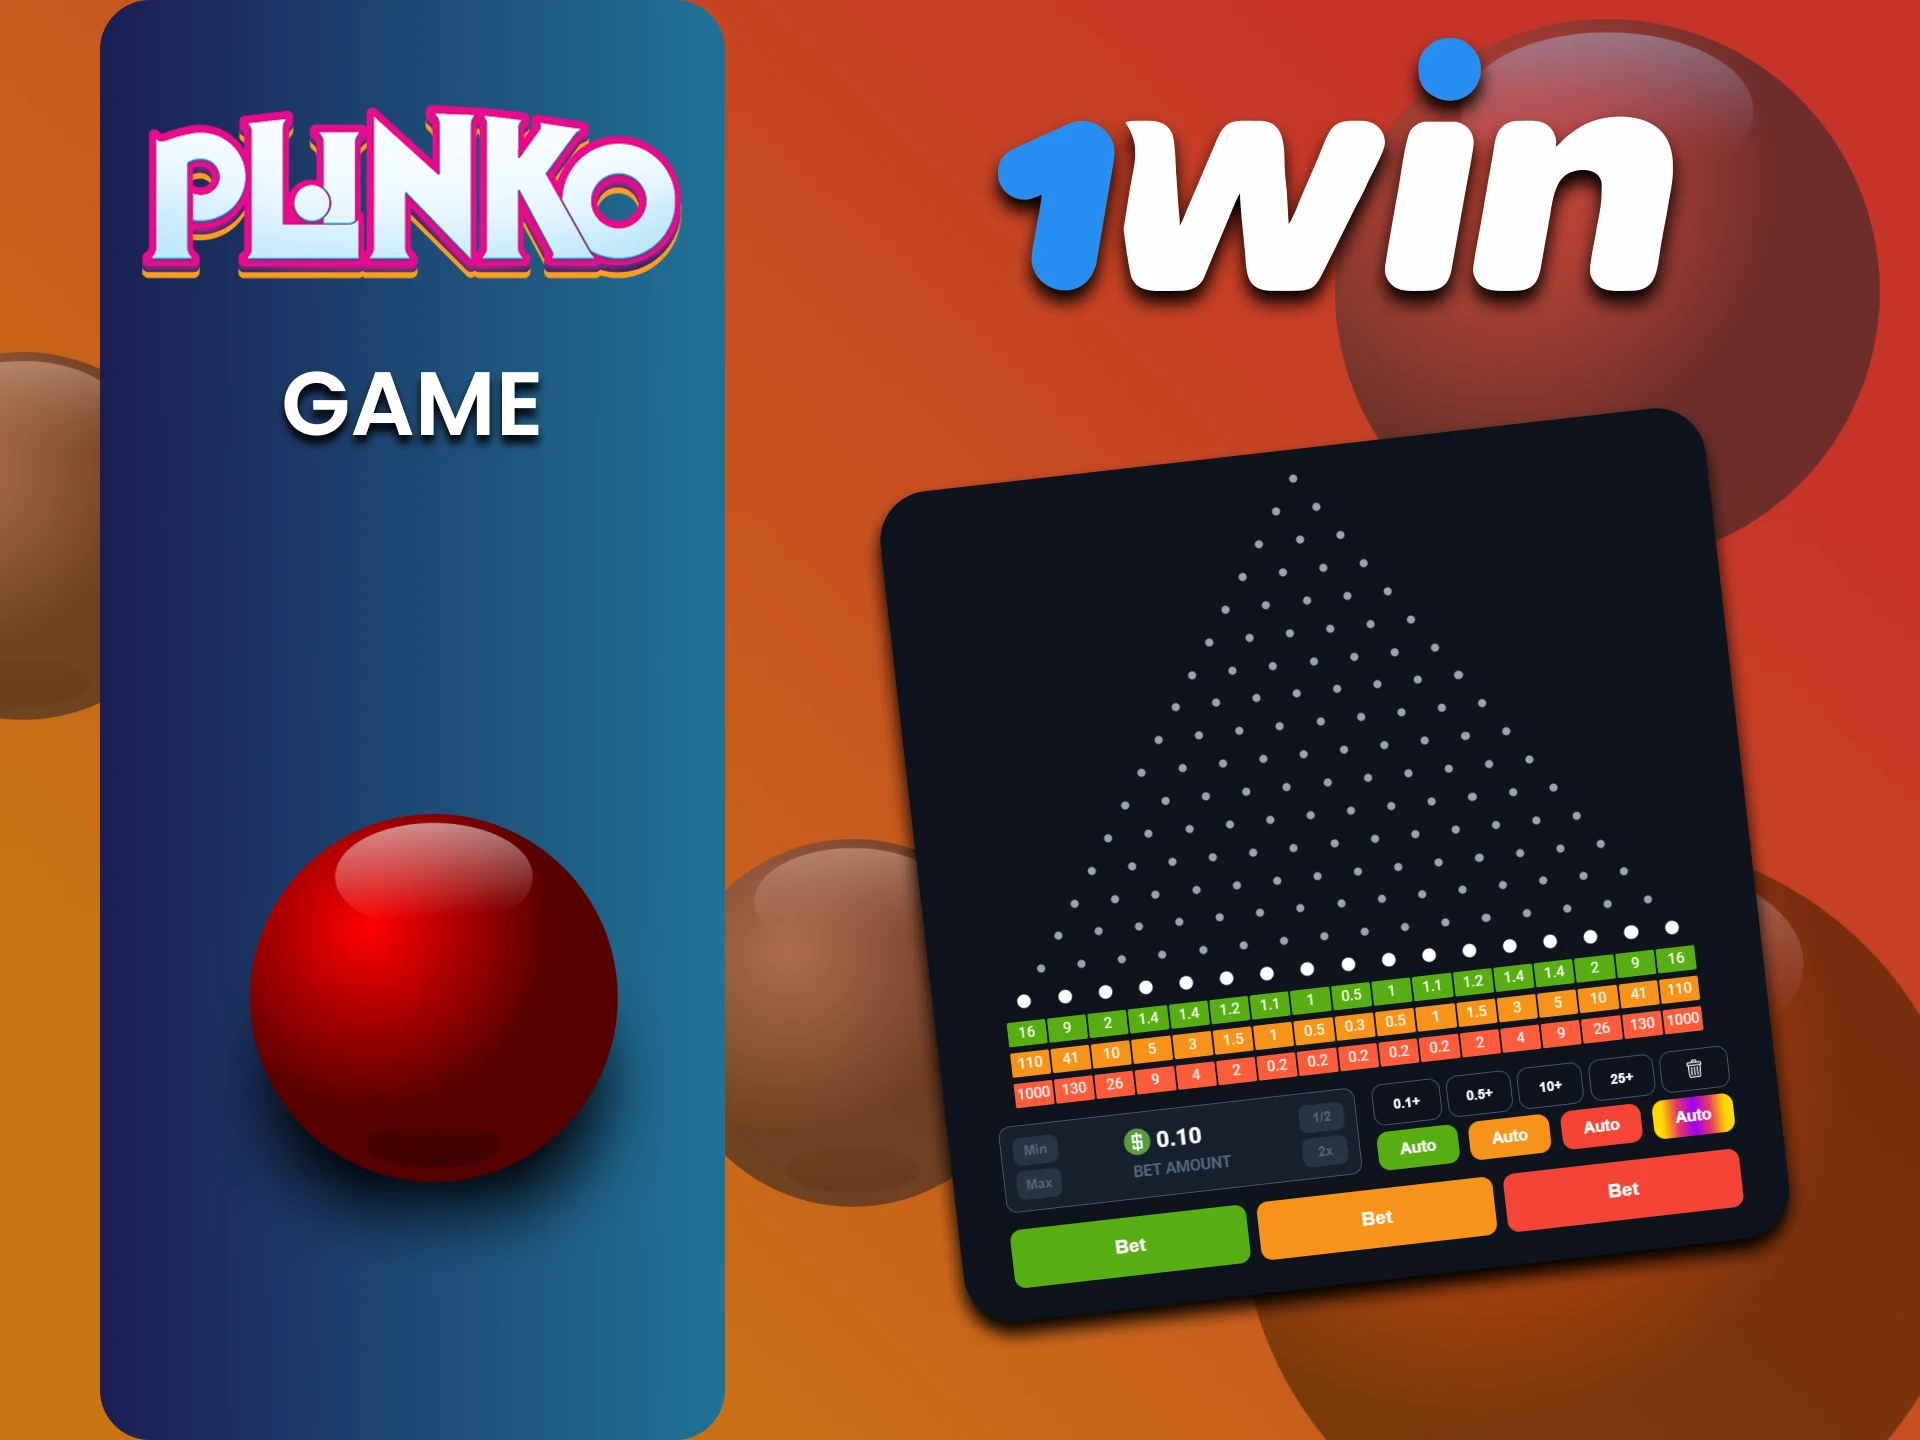 Find out everything about the Plinko game on 1win.